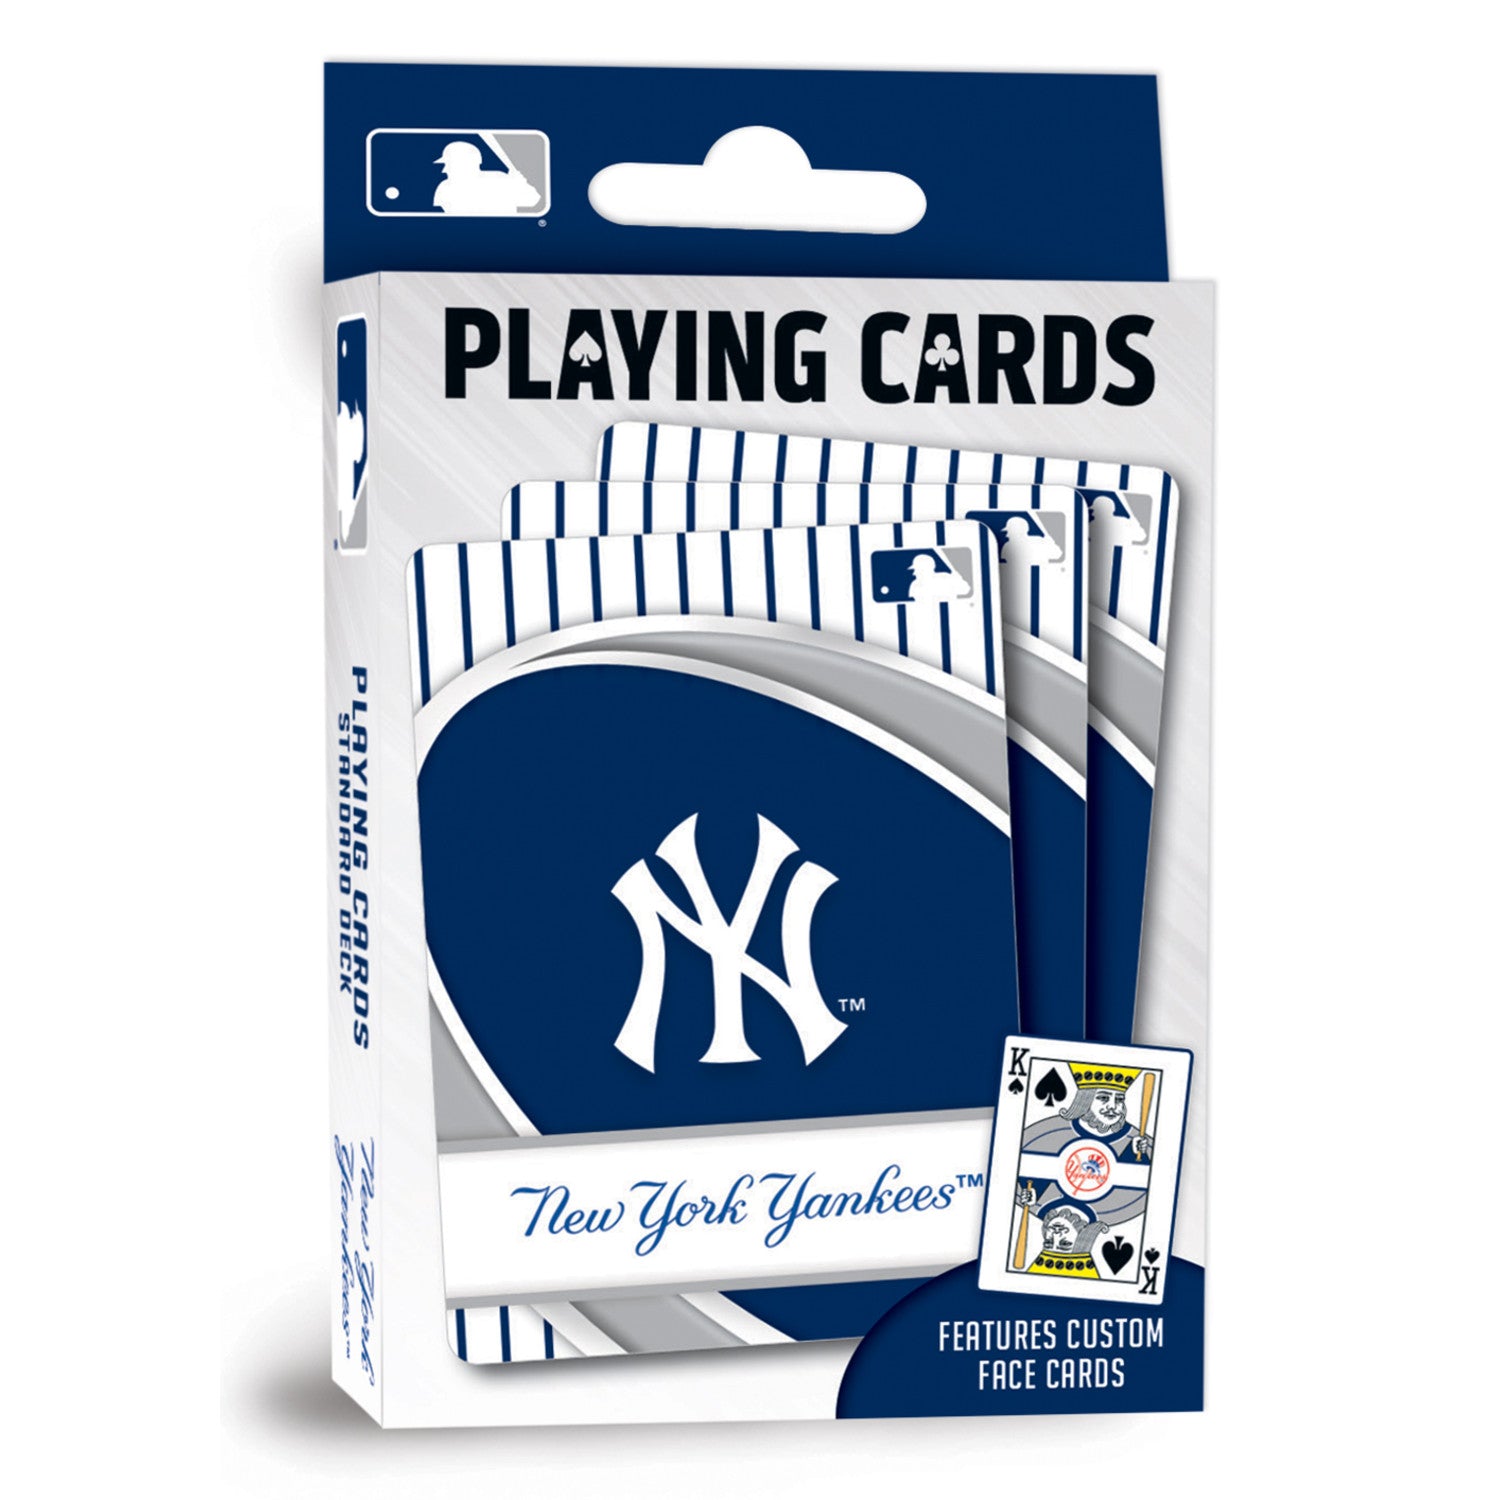 New York Yankees Playing Cards - 54 Card Deck